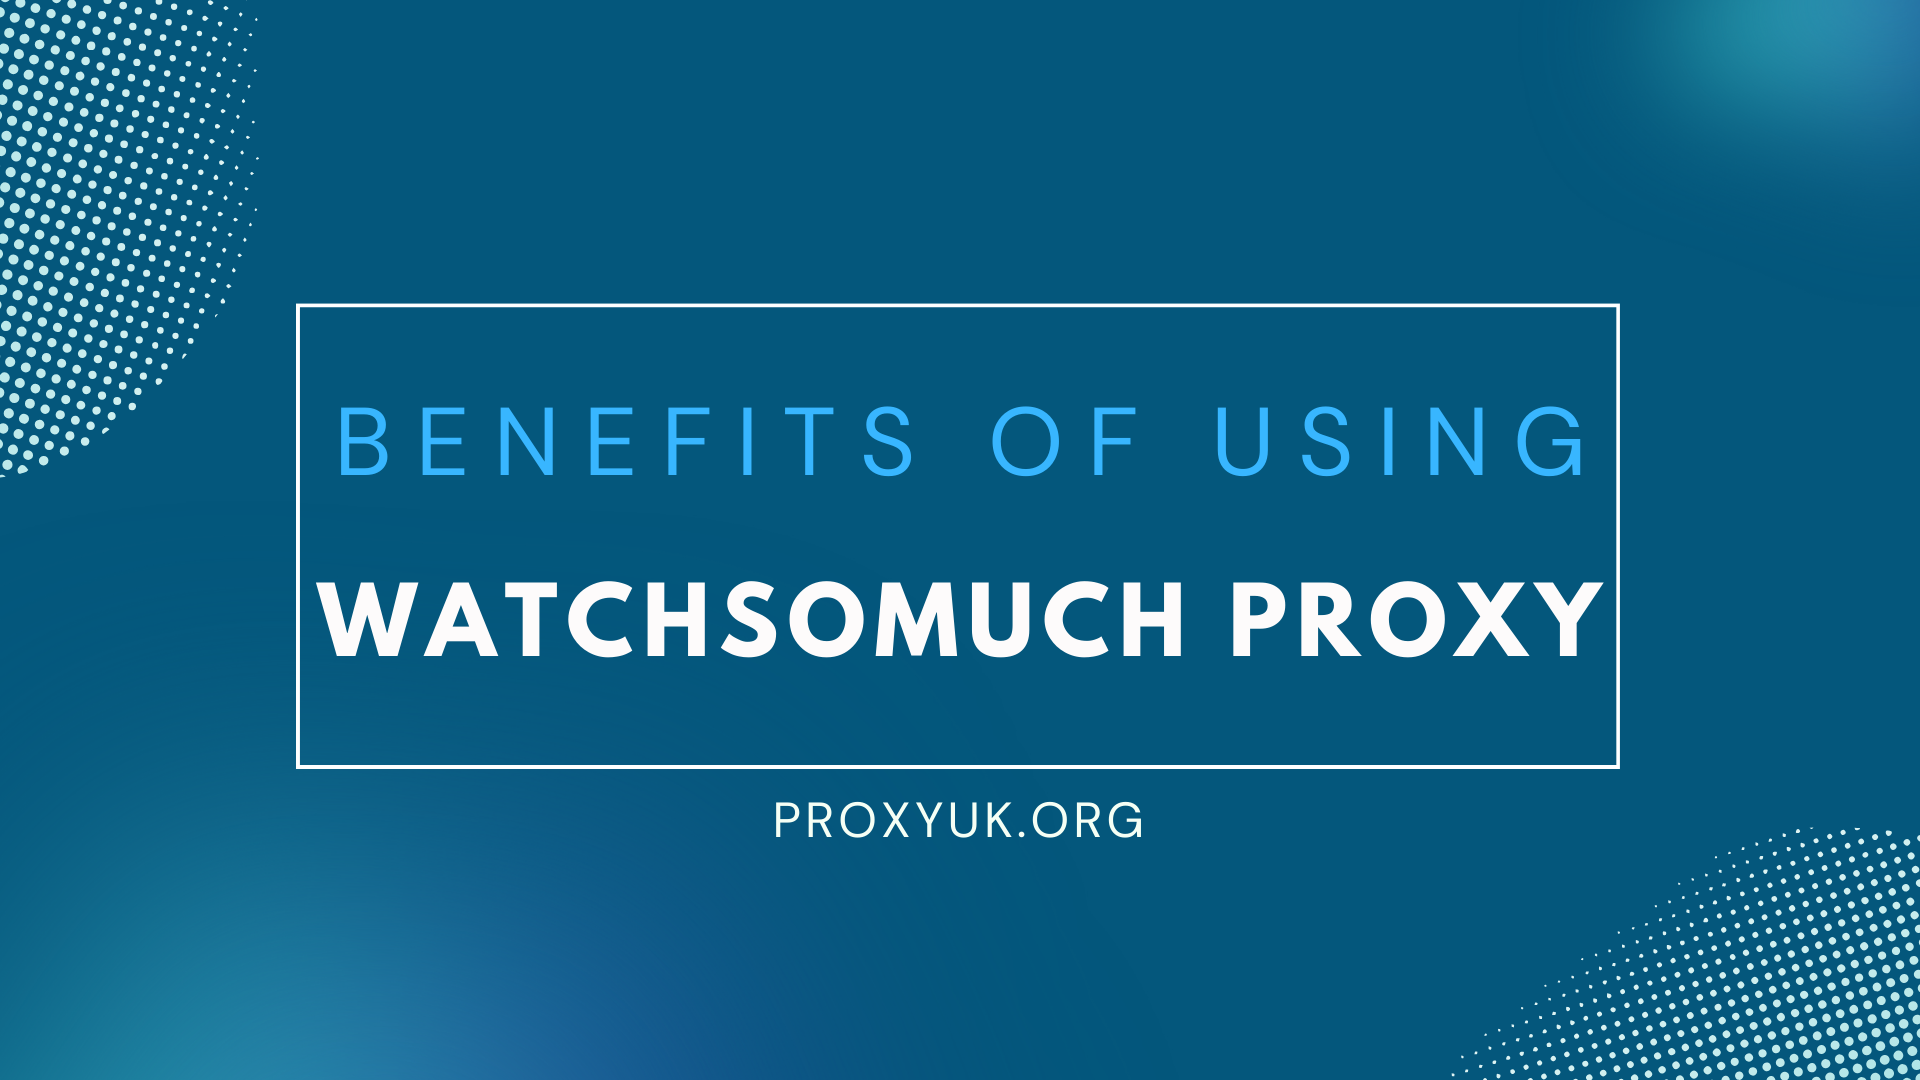 Benefits of using WatchSoMuch Proxy